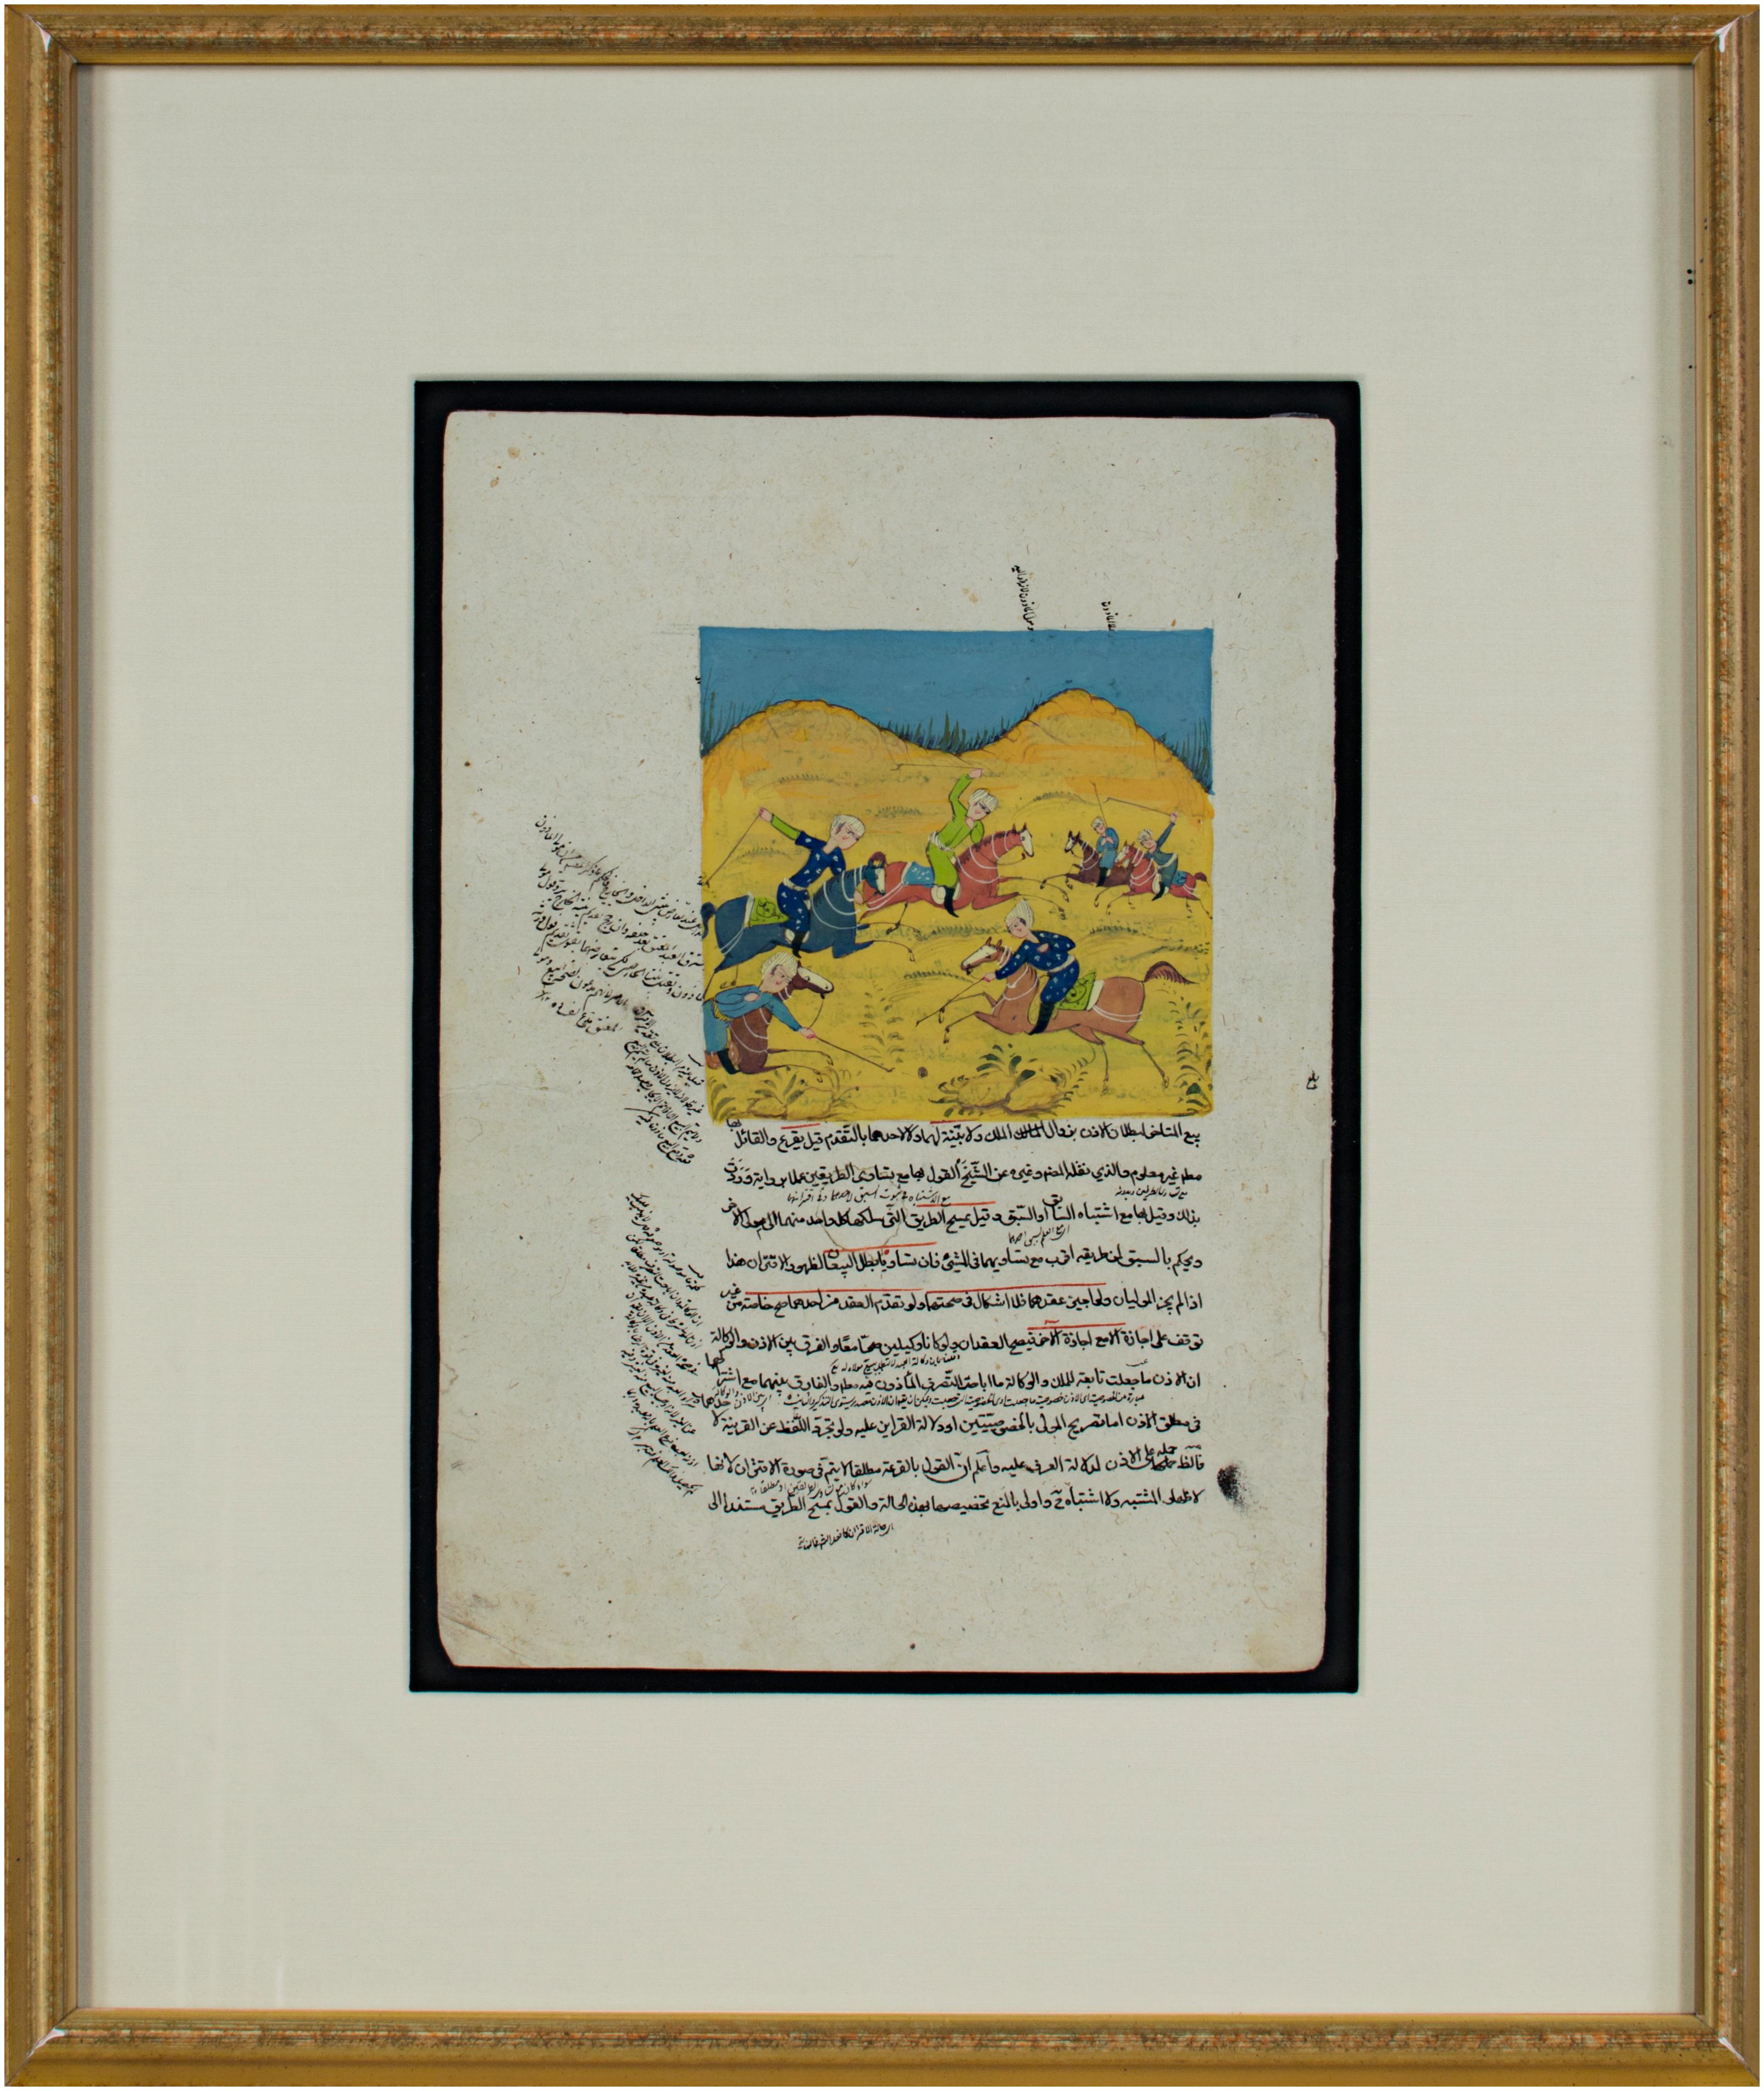 Persian Illuminated Miniature with Six Figures Playing Polo in a Landscape - Painting by Unknown